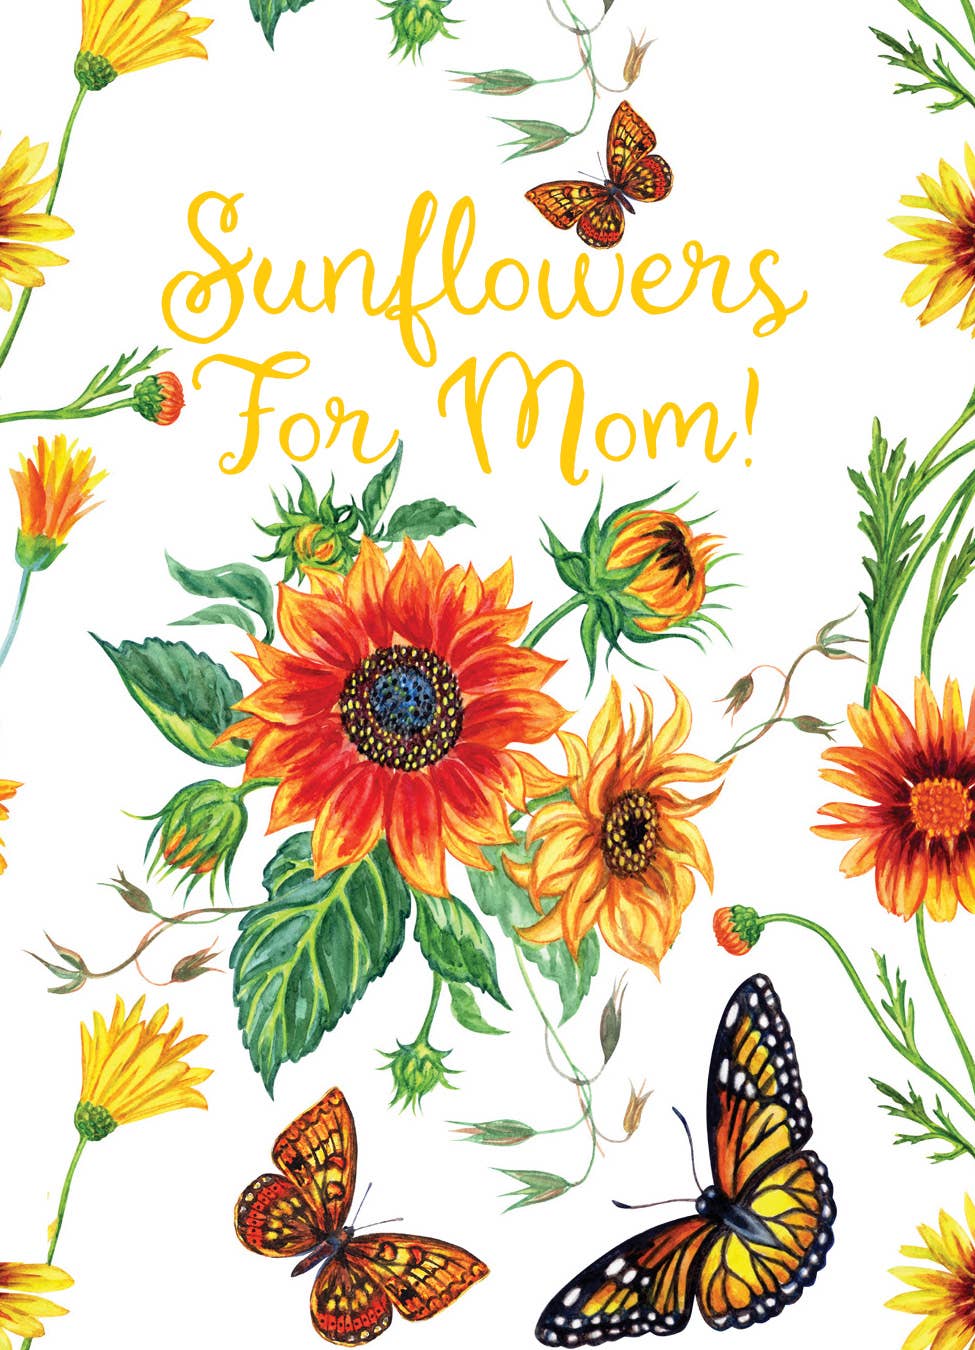 Sunflowers For Mom - All Sorts Sunflower Seed Packets